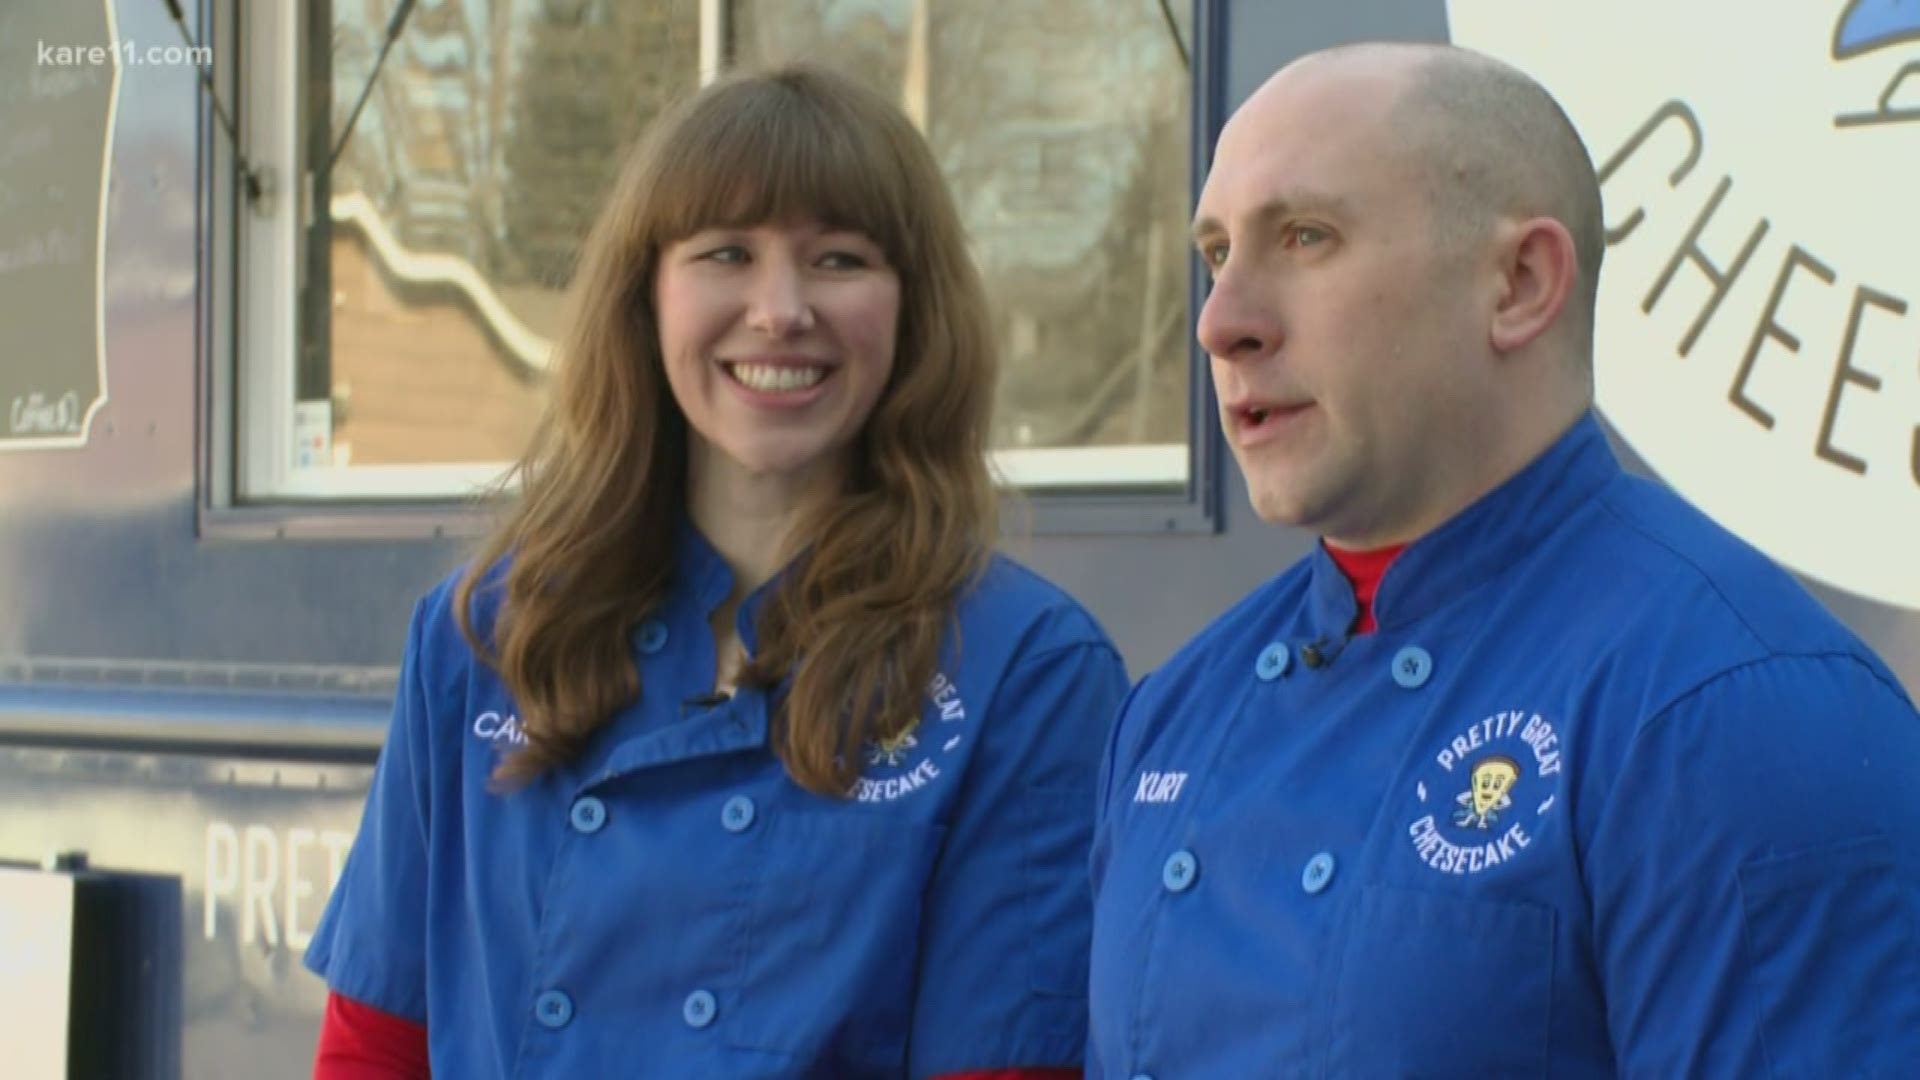 Chaska firefighter/food scientist Kurt Anderson and his wife Carrie offer the Twin Cities a new spin on food truck dessert options with Pretty Great Cheesecake